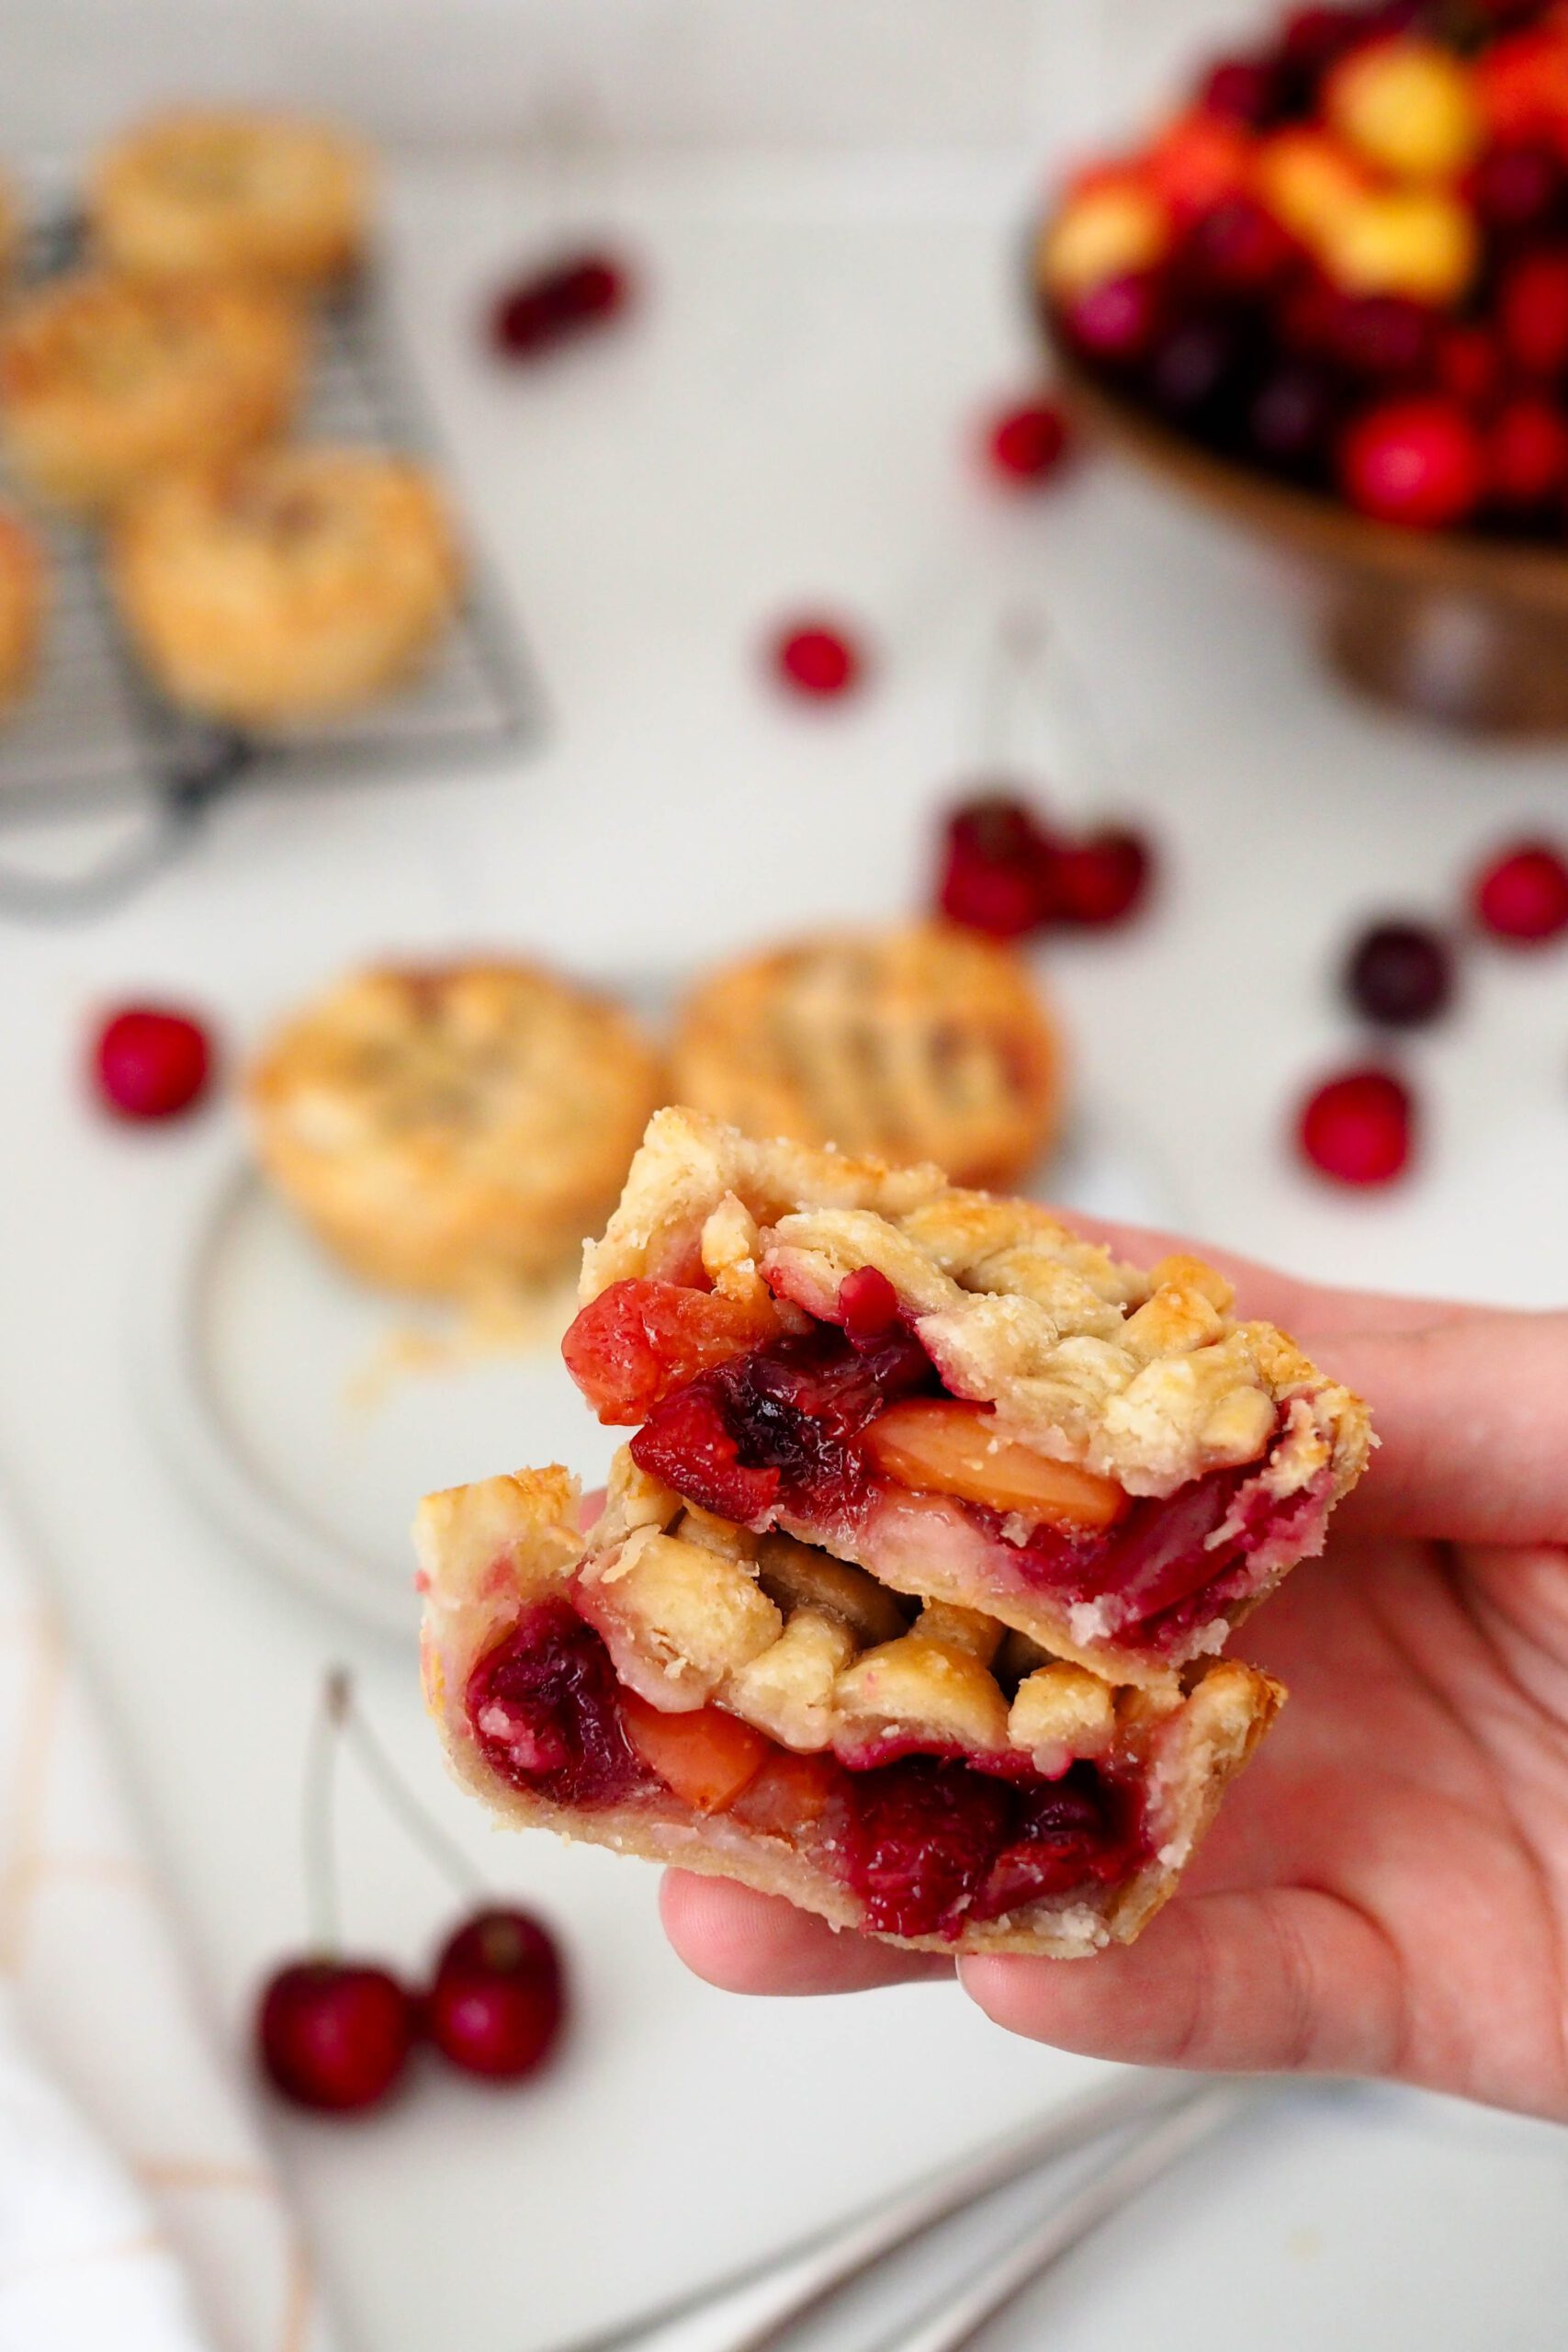 A hand holds up two halves of a mini cherry pie.